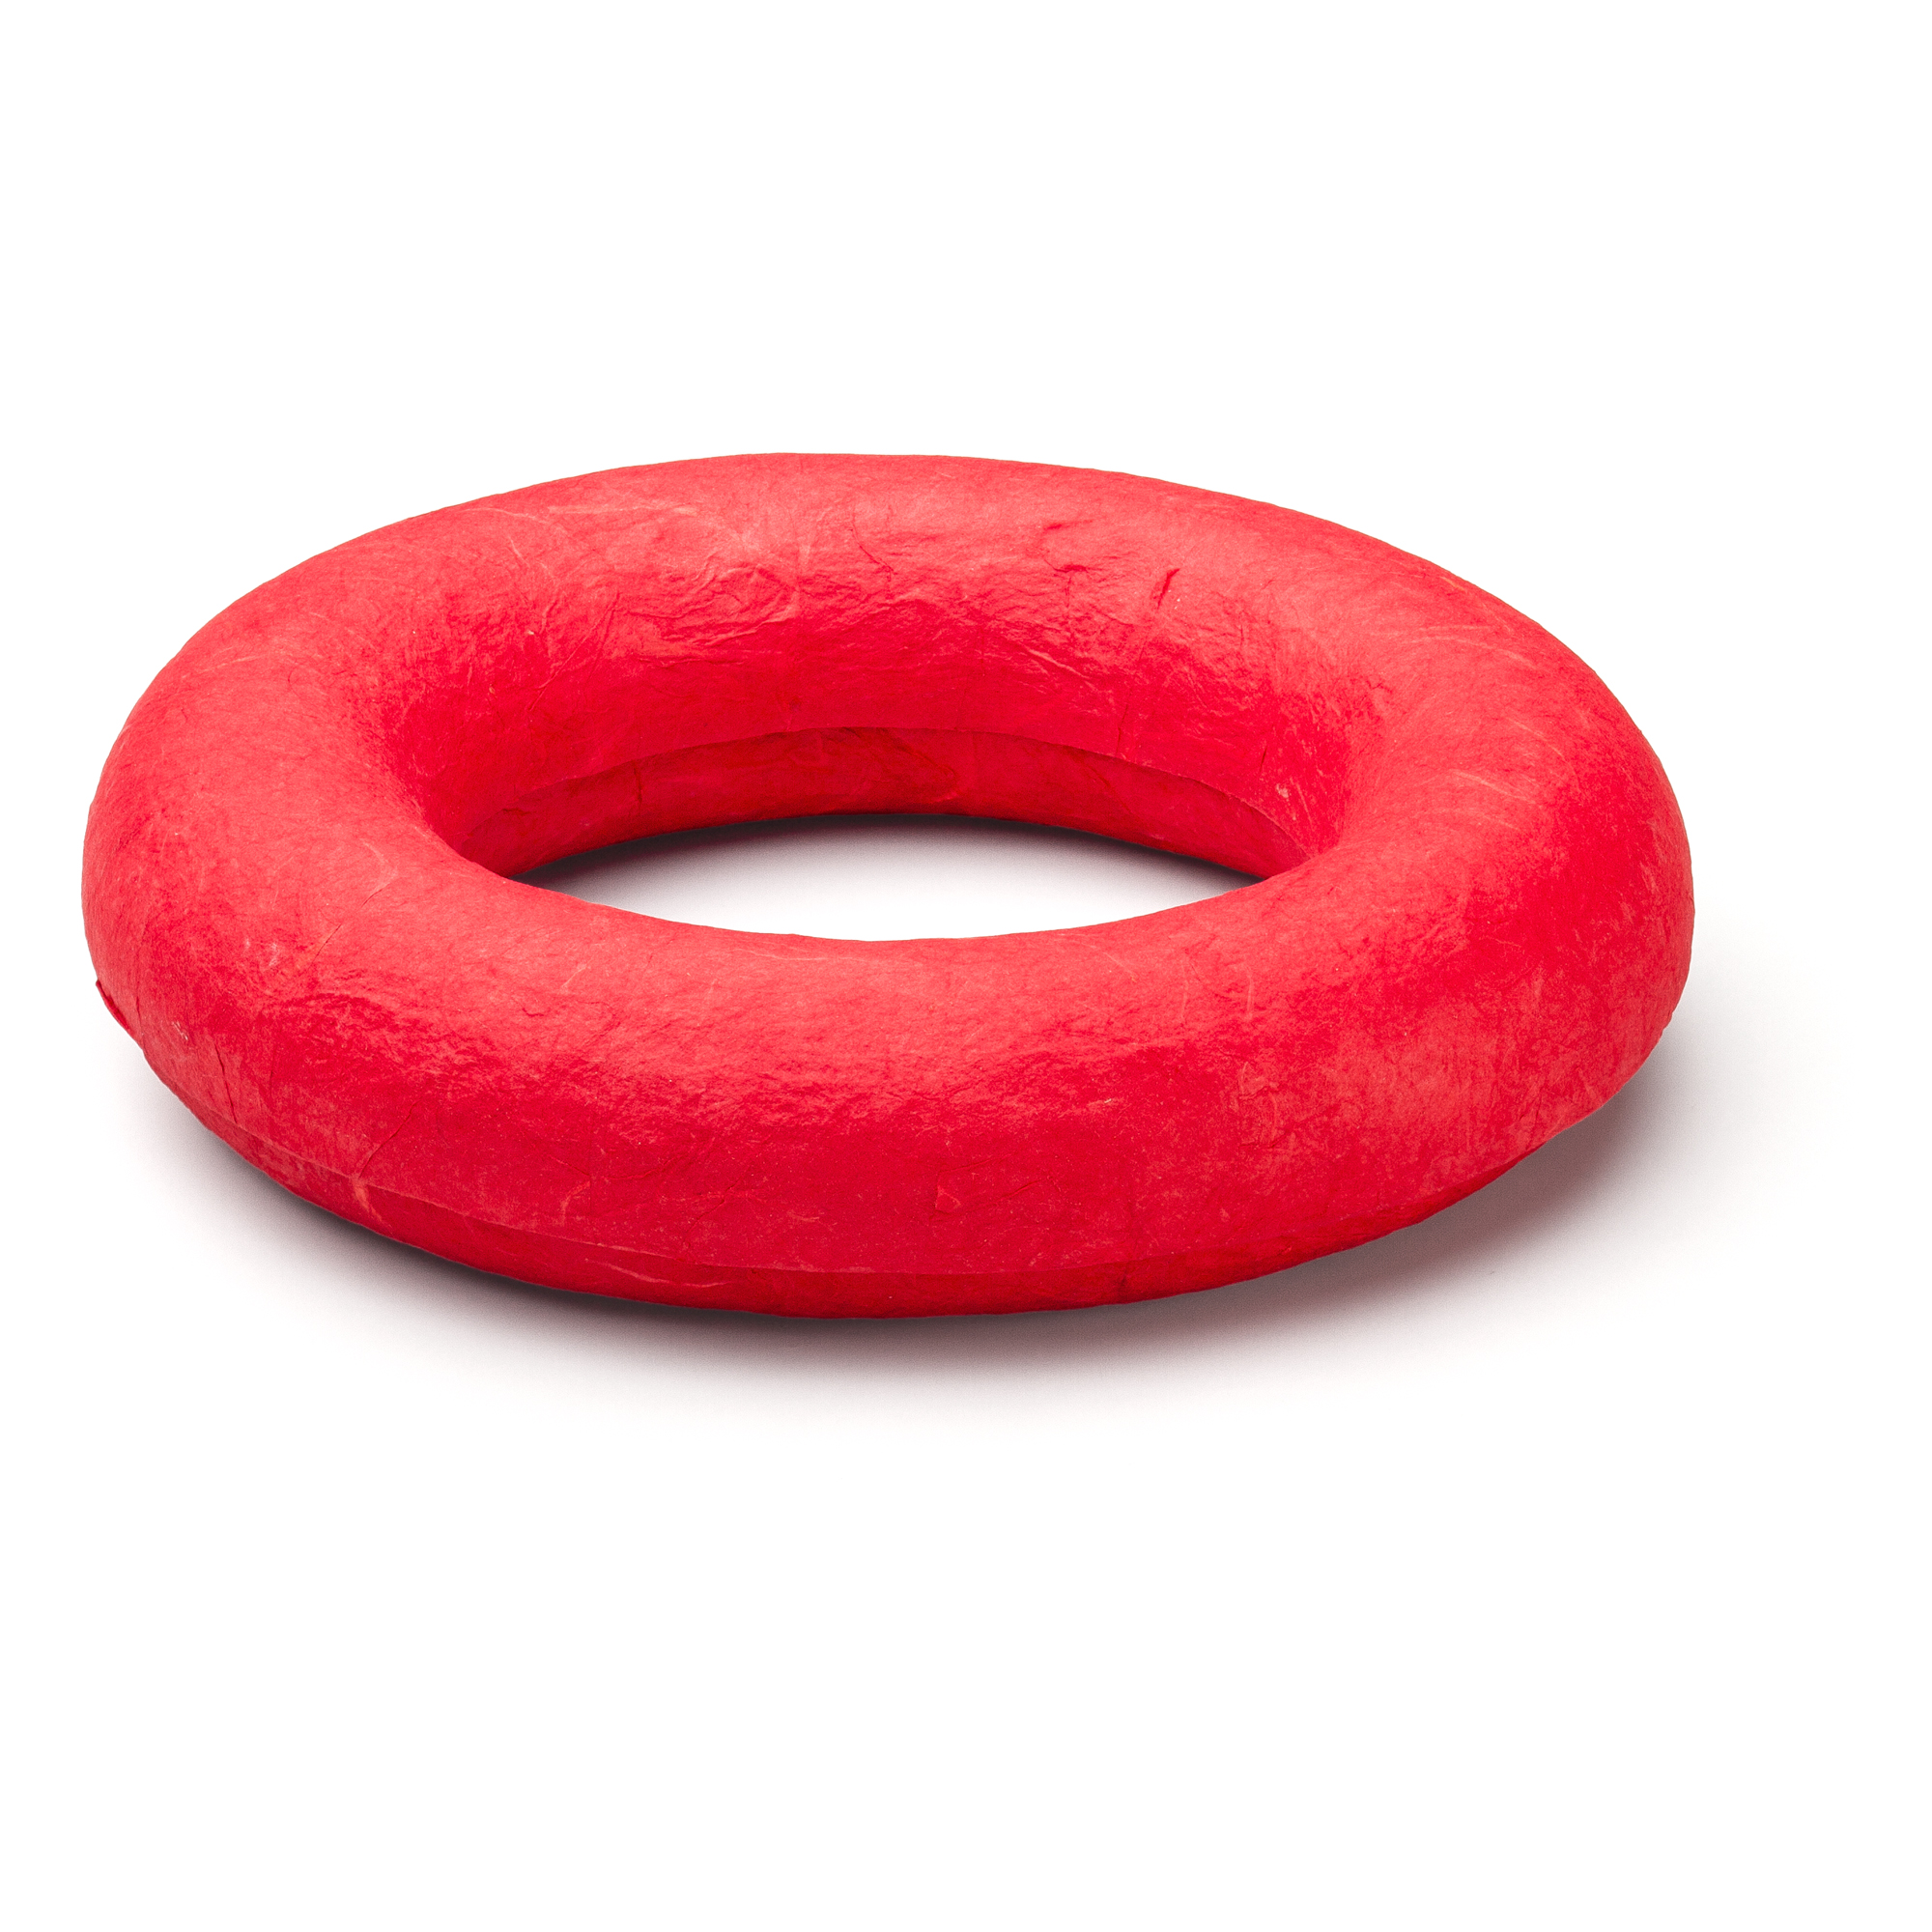 Donut large, 190 mm, red